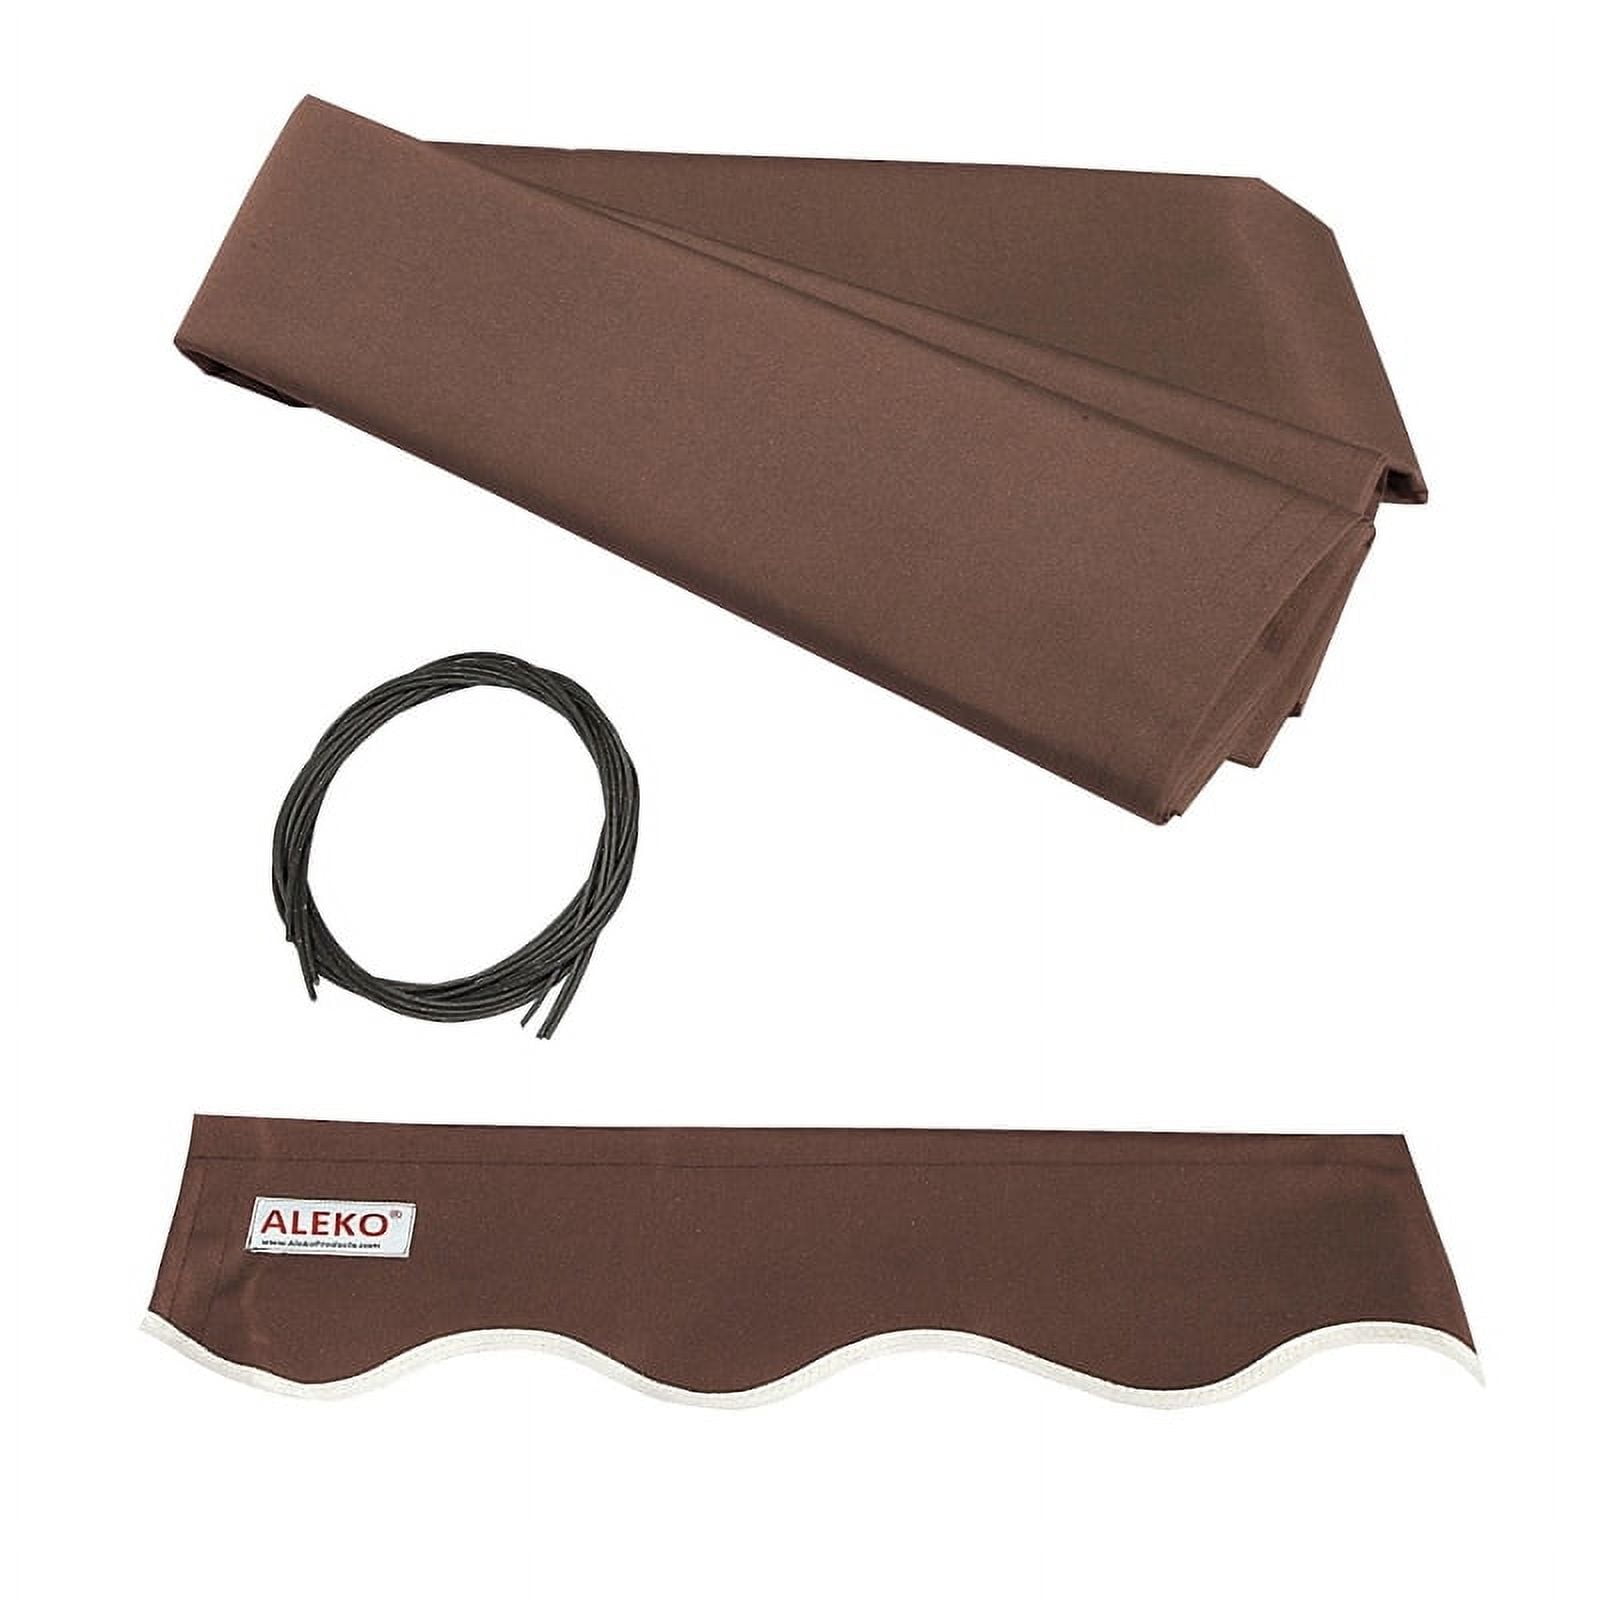 Picture of ALEKO Awning Fabric Replacement for Retractable 8 x 6.5 Ft Awning Brown